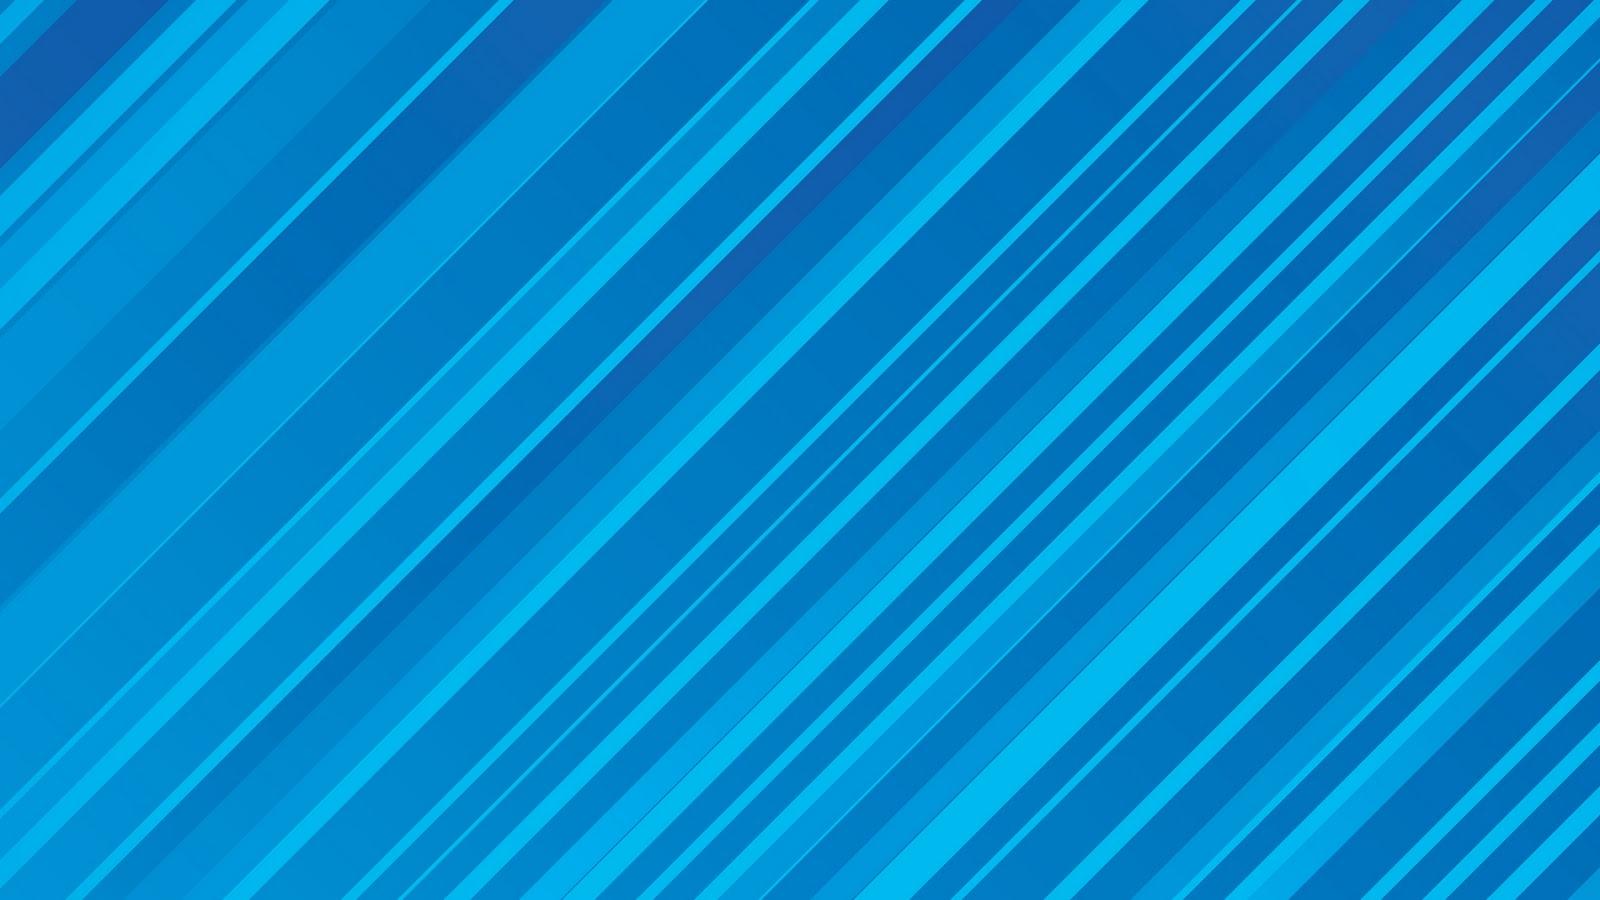 Cool Blue Computer Wallpapers - Top Free Cool Blue Computer Backgrounds ...